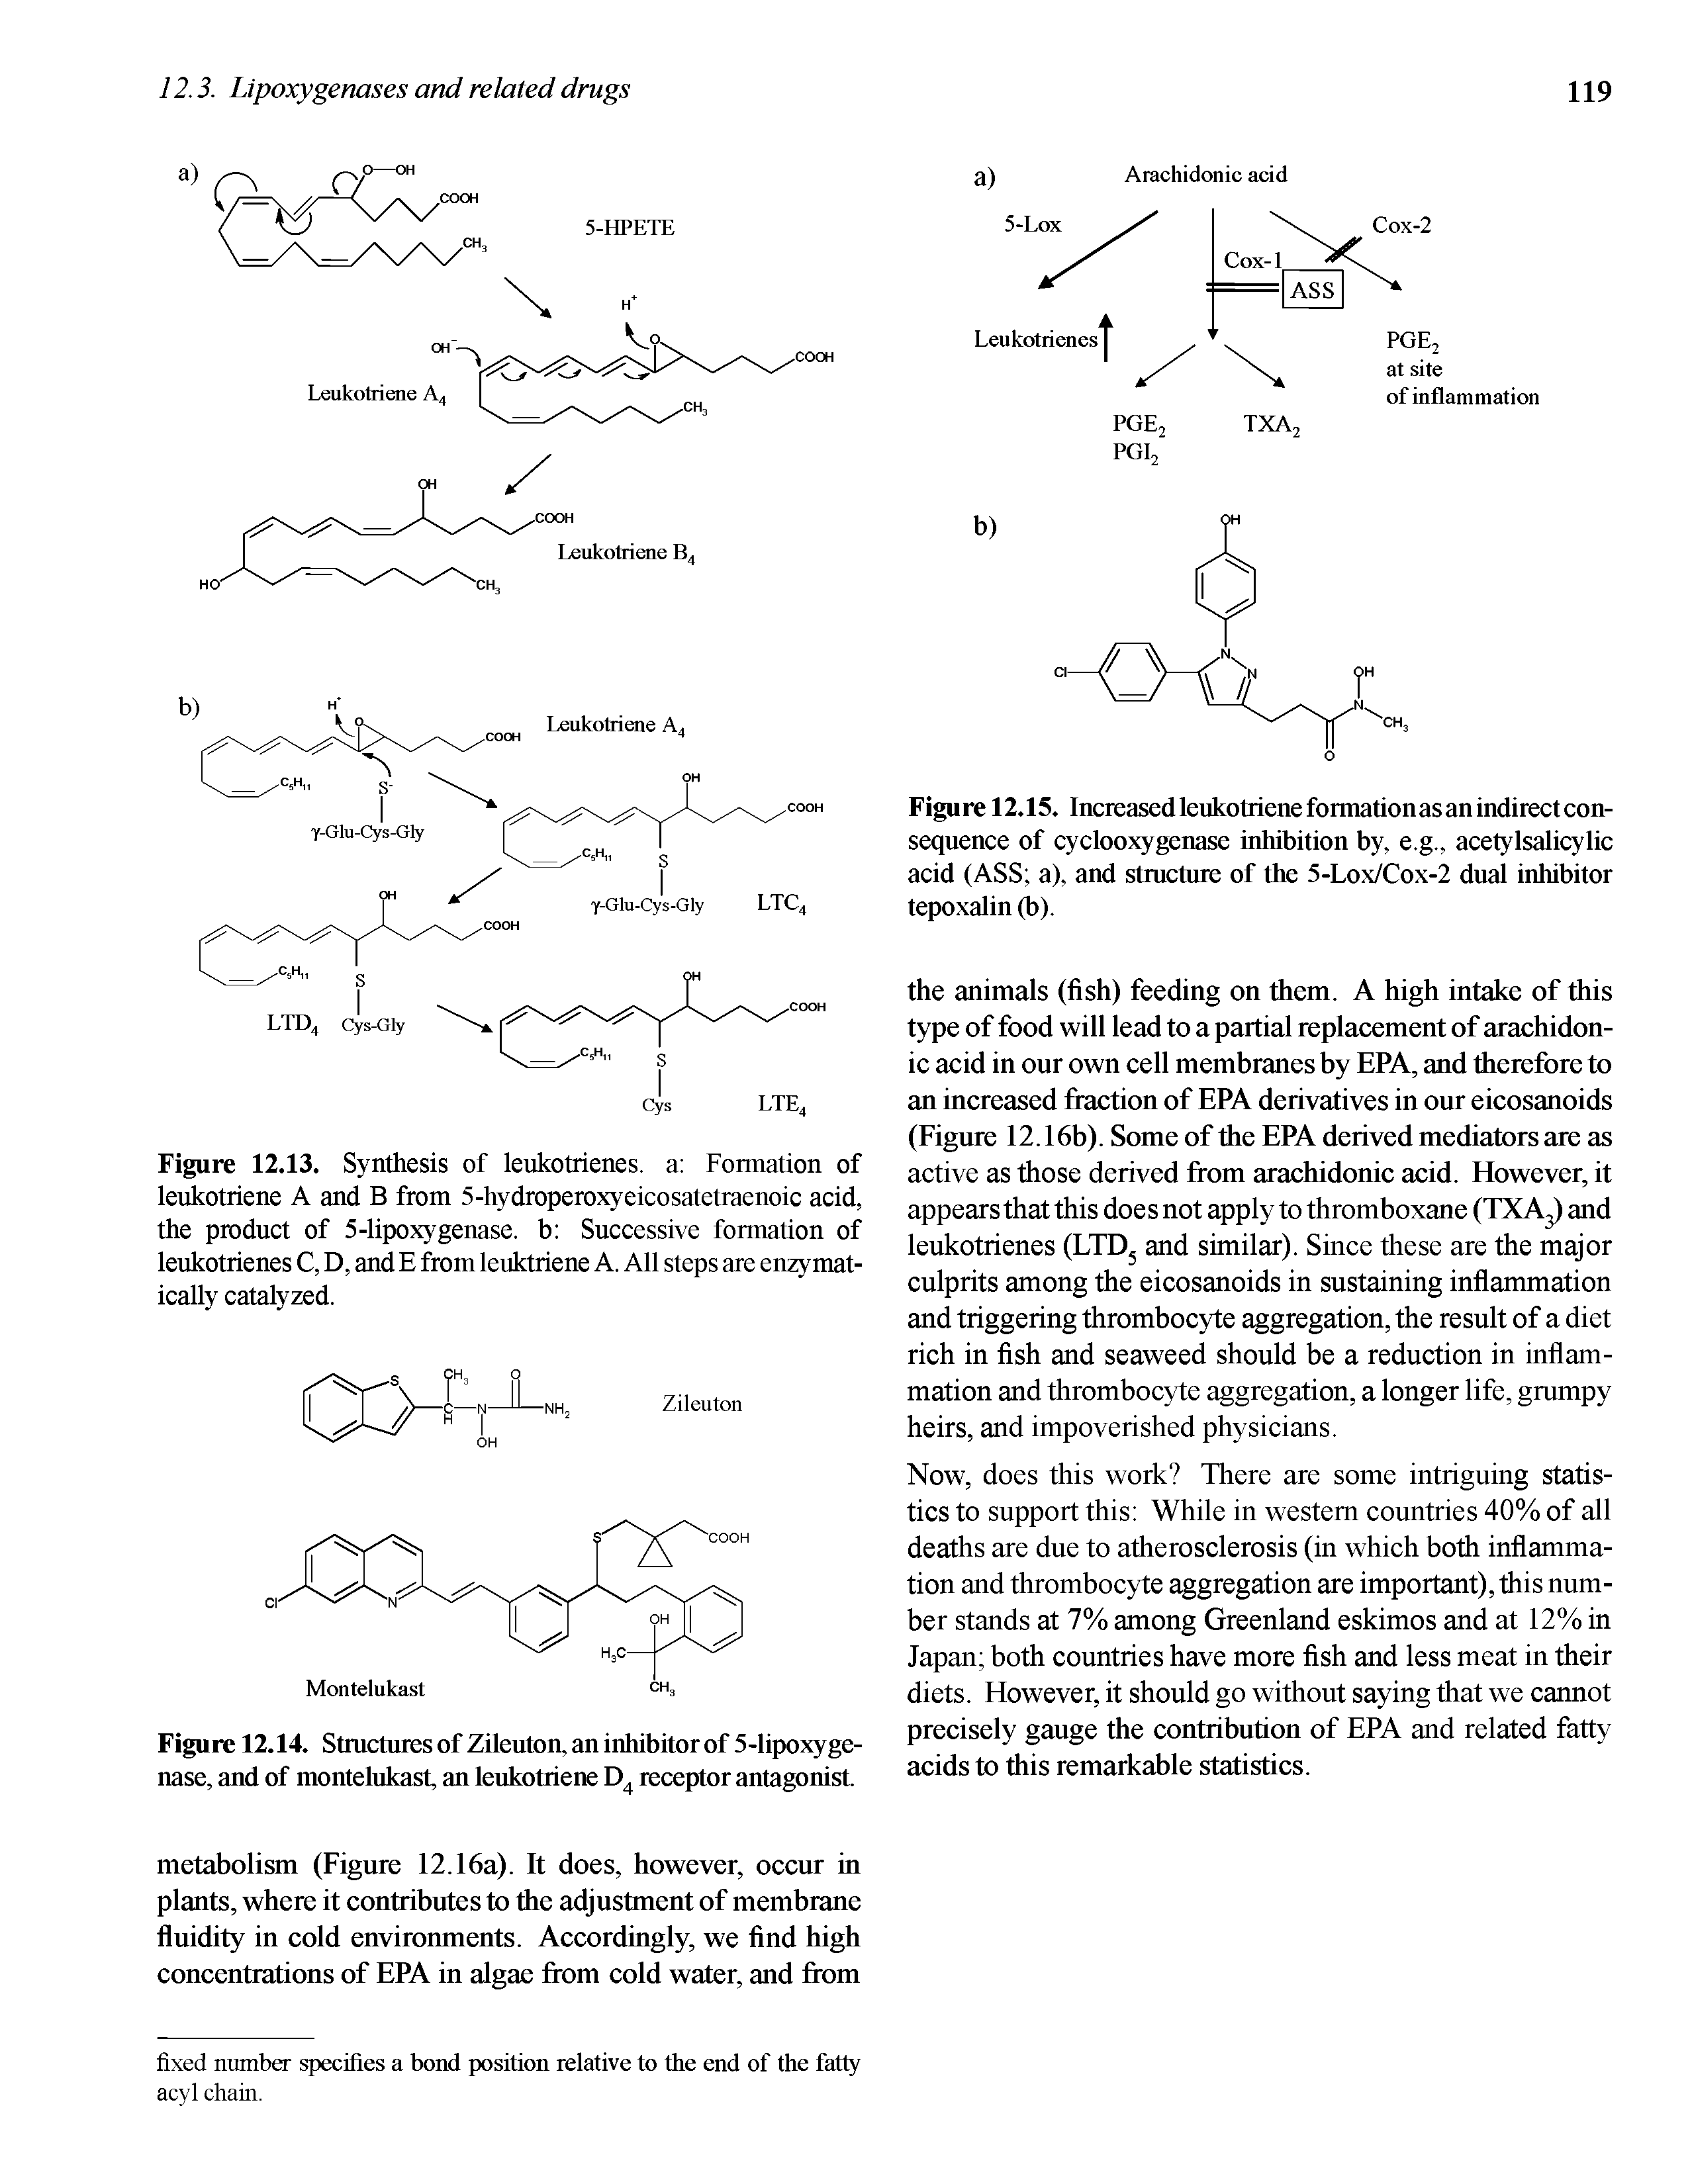 Figure 12.13. Synthesis of leukotrienes. a Formation of leukotriene A and B from 5-hydroperoxyeicosatetraenoic acid, the product of 5-lipoxygenase, b Successive formation of leukotrienes C, D, and E from leuktriene A. All steps are enzymatically catalyzed.